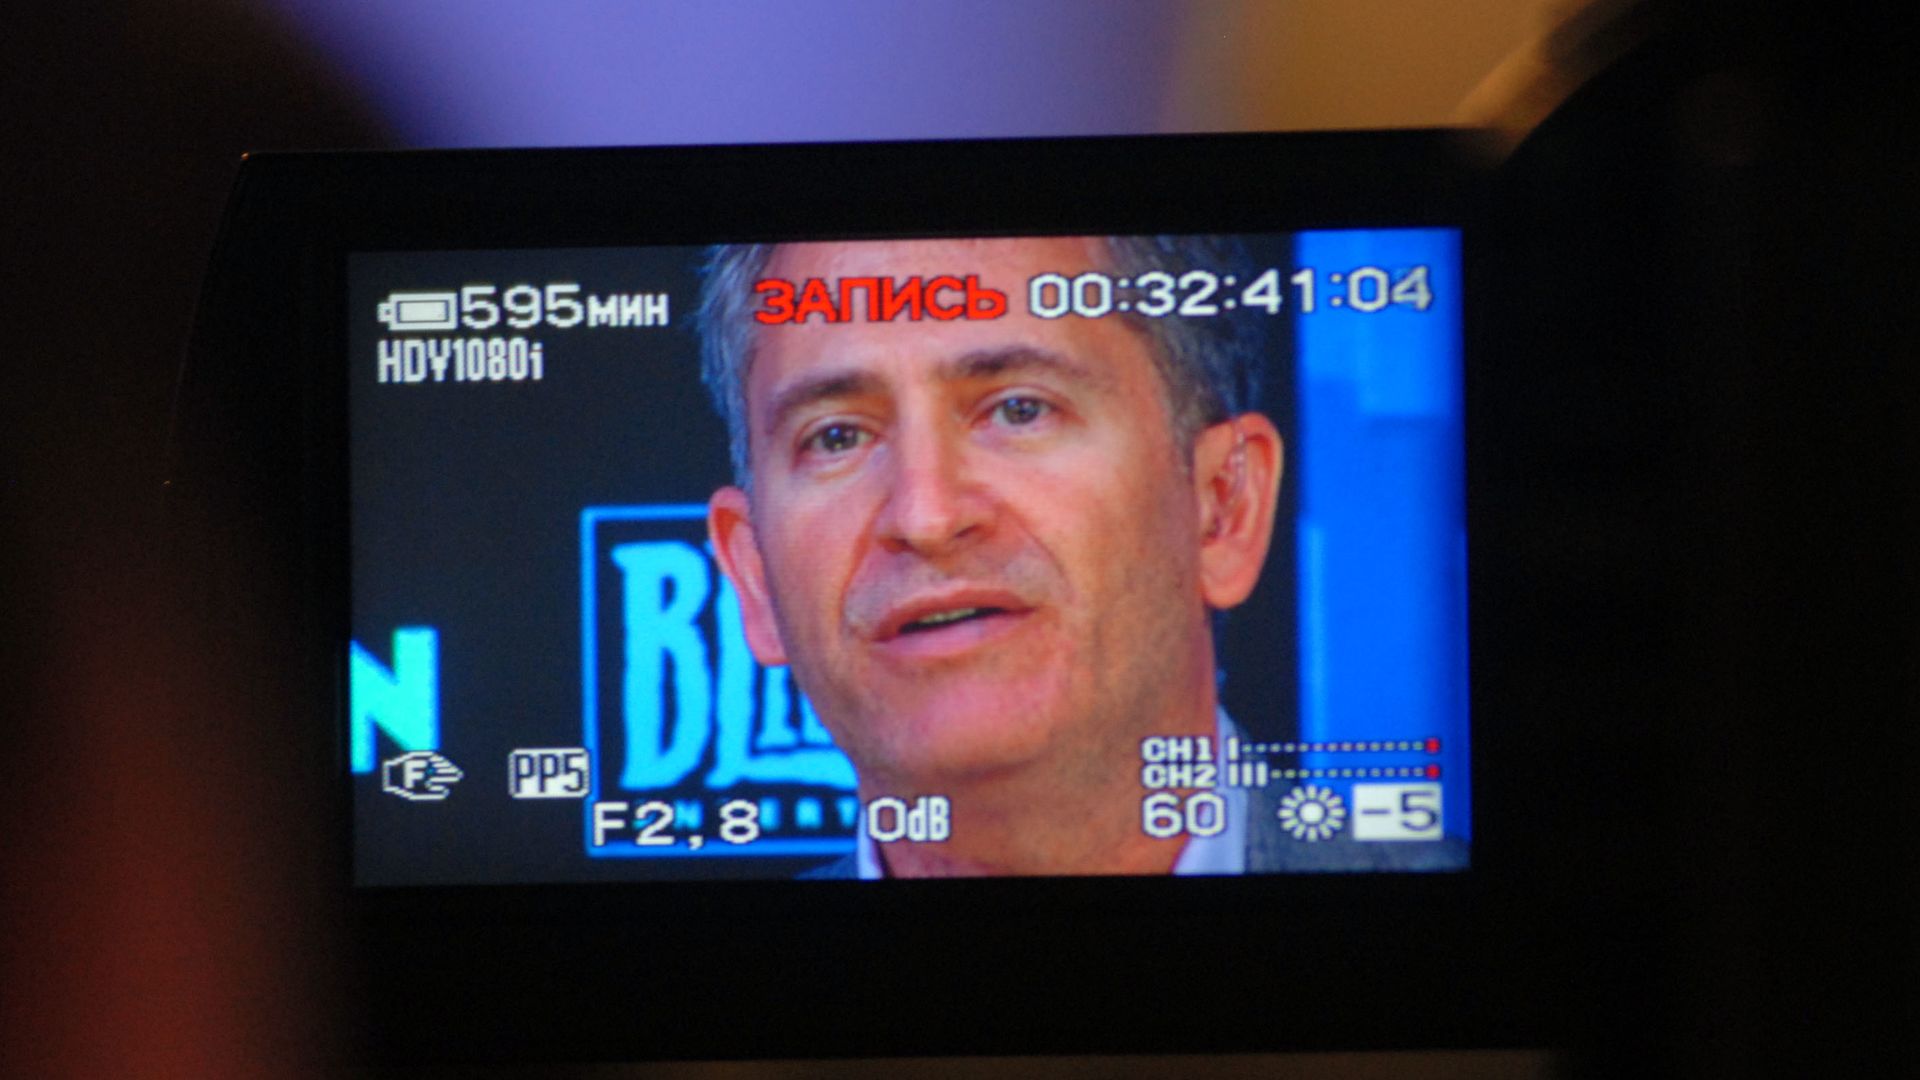 Photo of executive Mike Morhaime, seen through a video camera's viewfinder